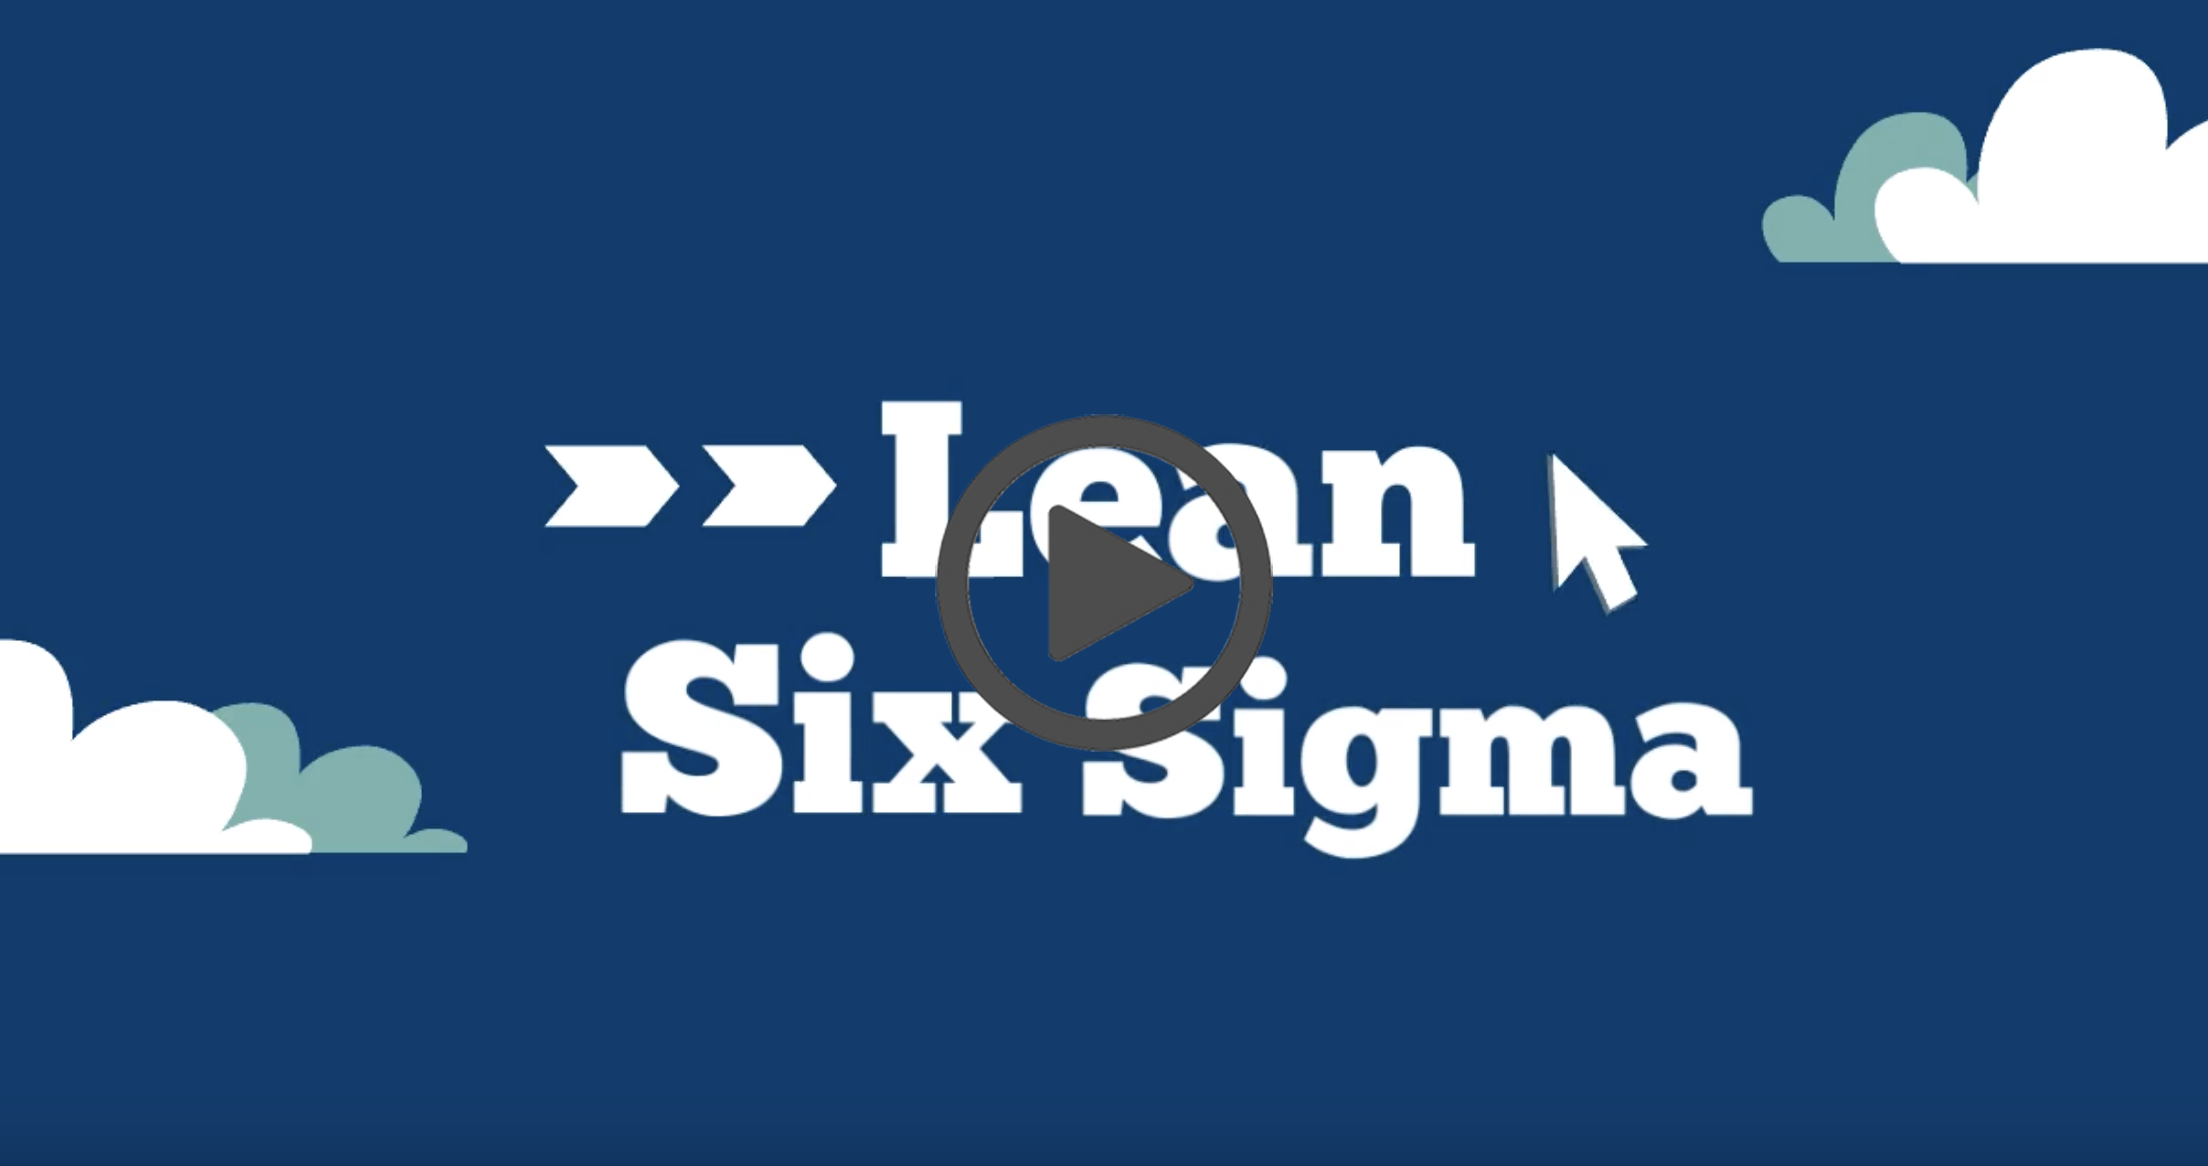 Lean Six Sigma video image click to watch